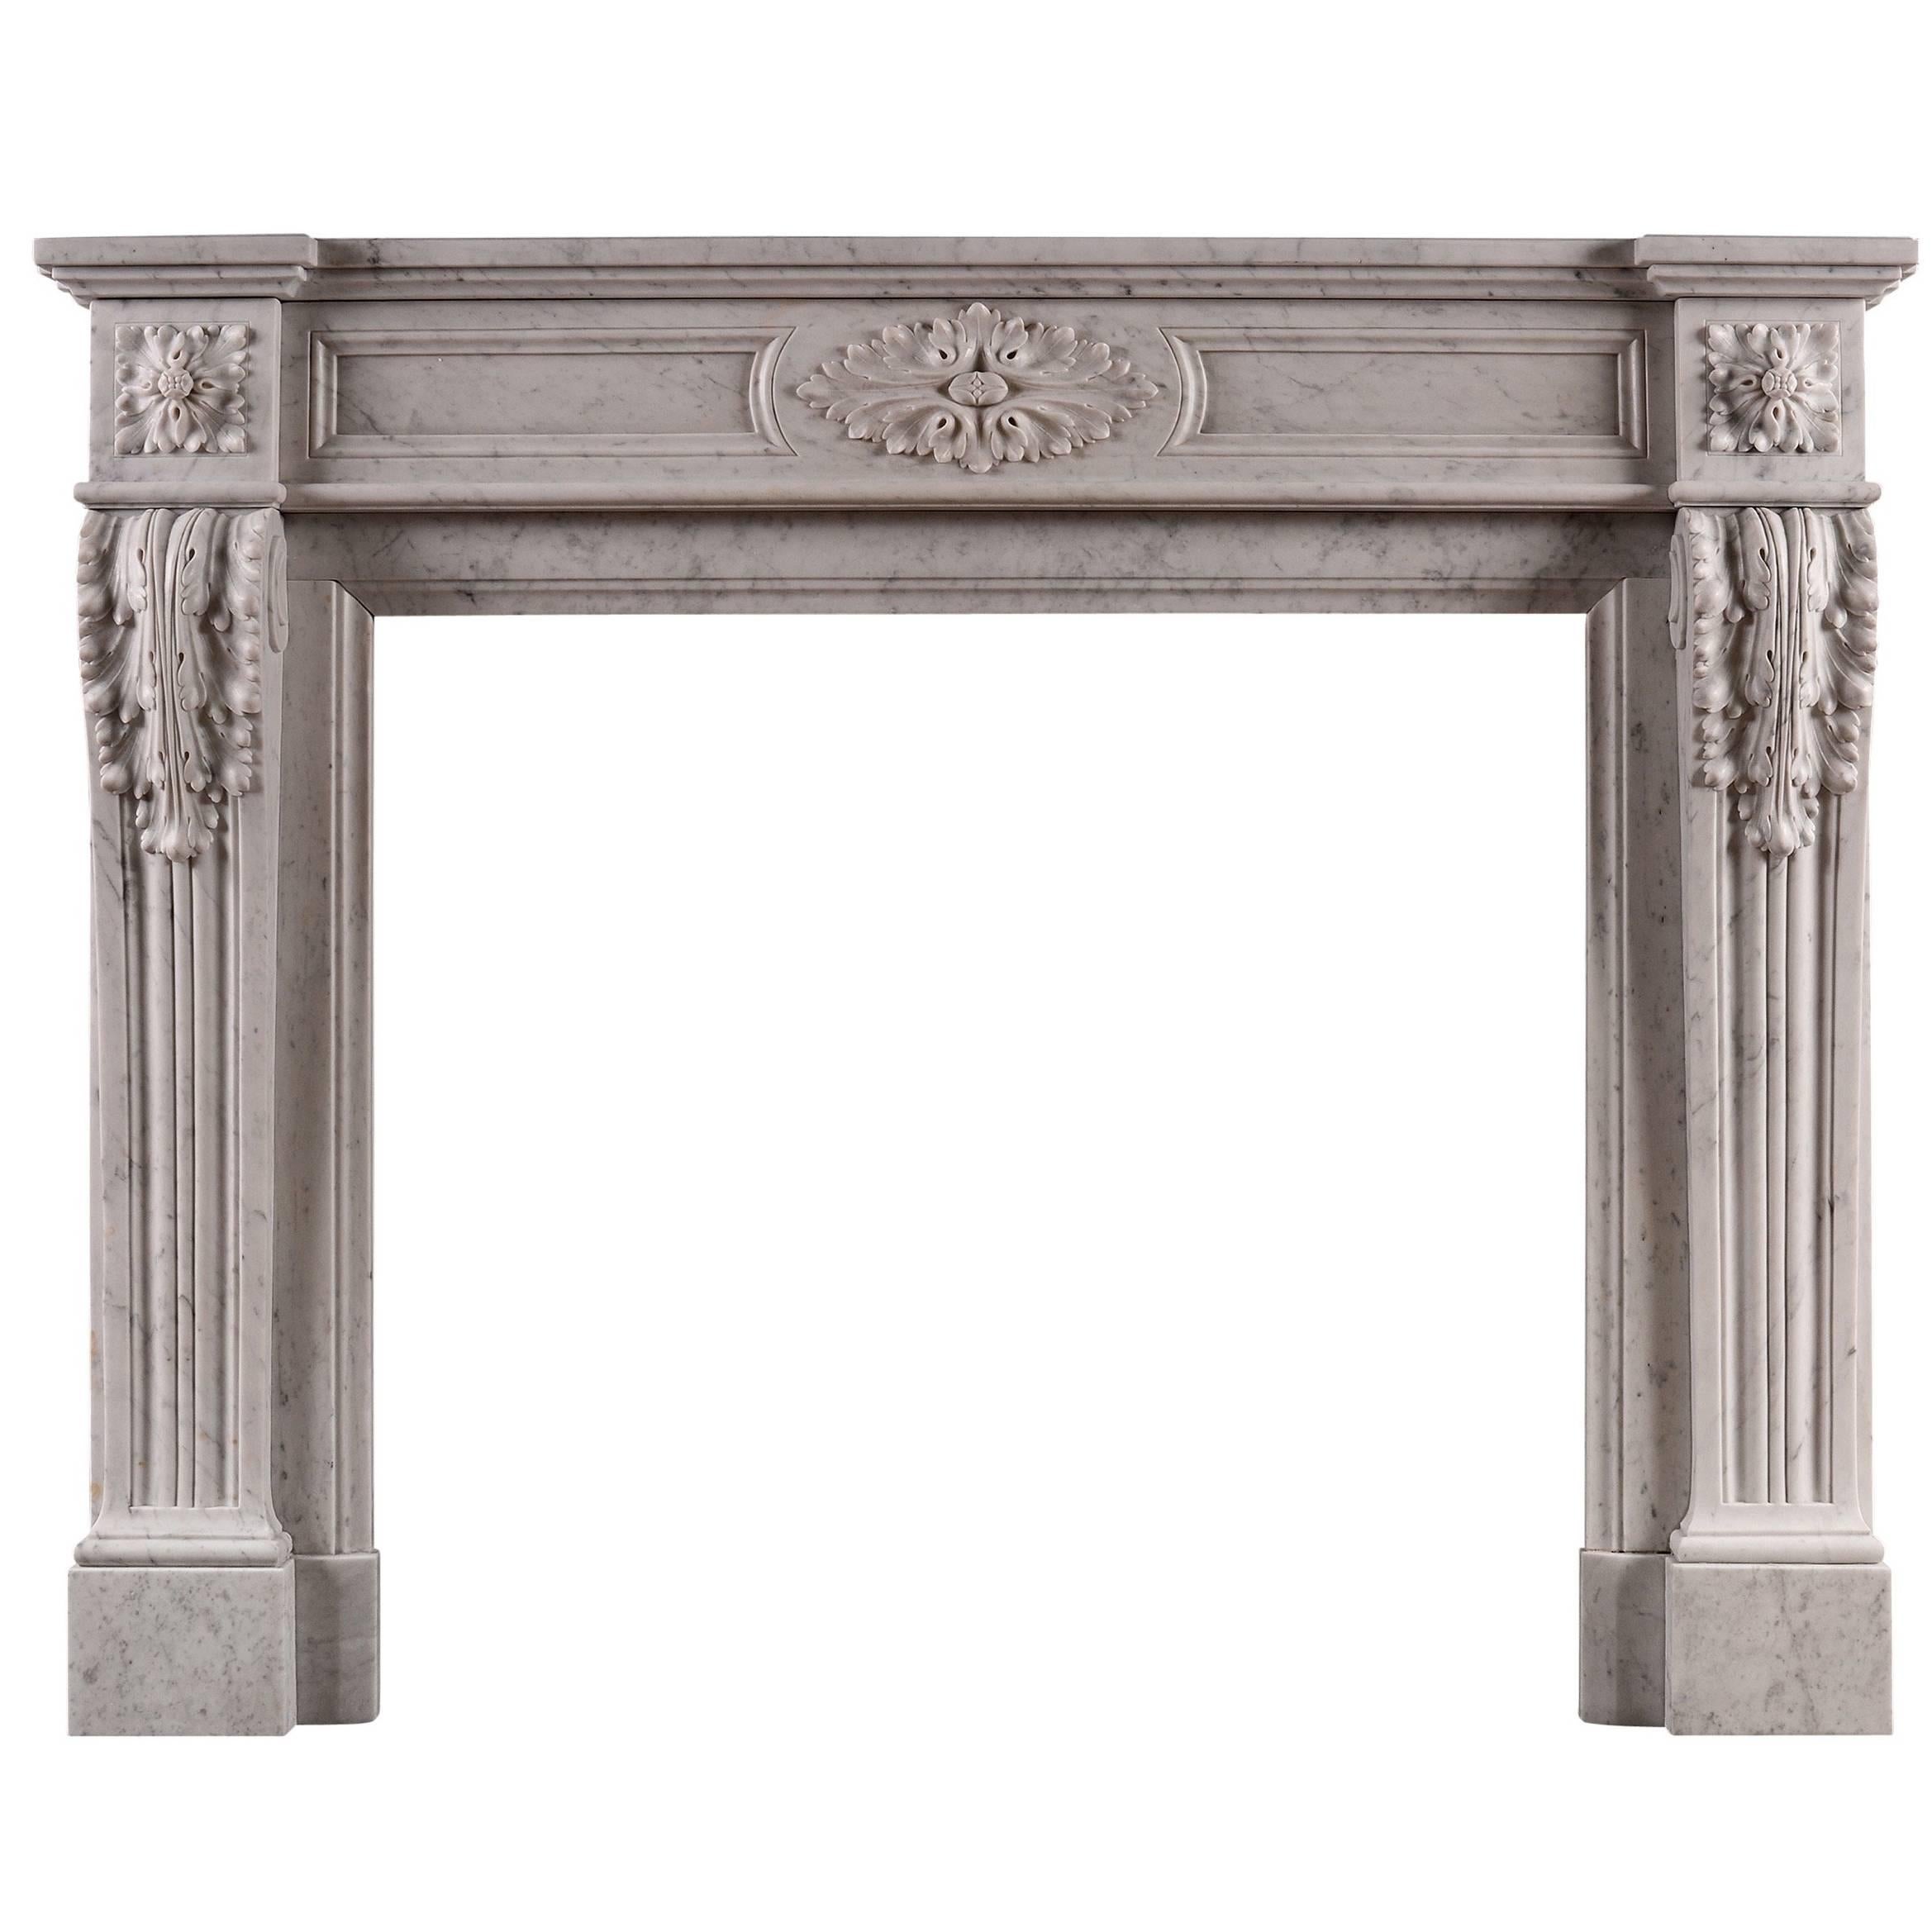 French Louis XVI Style Carrara Marble Antique Fireplace